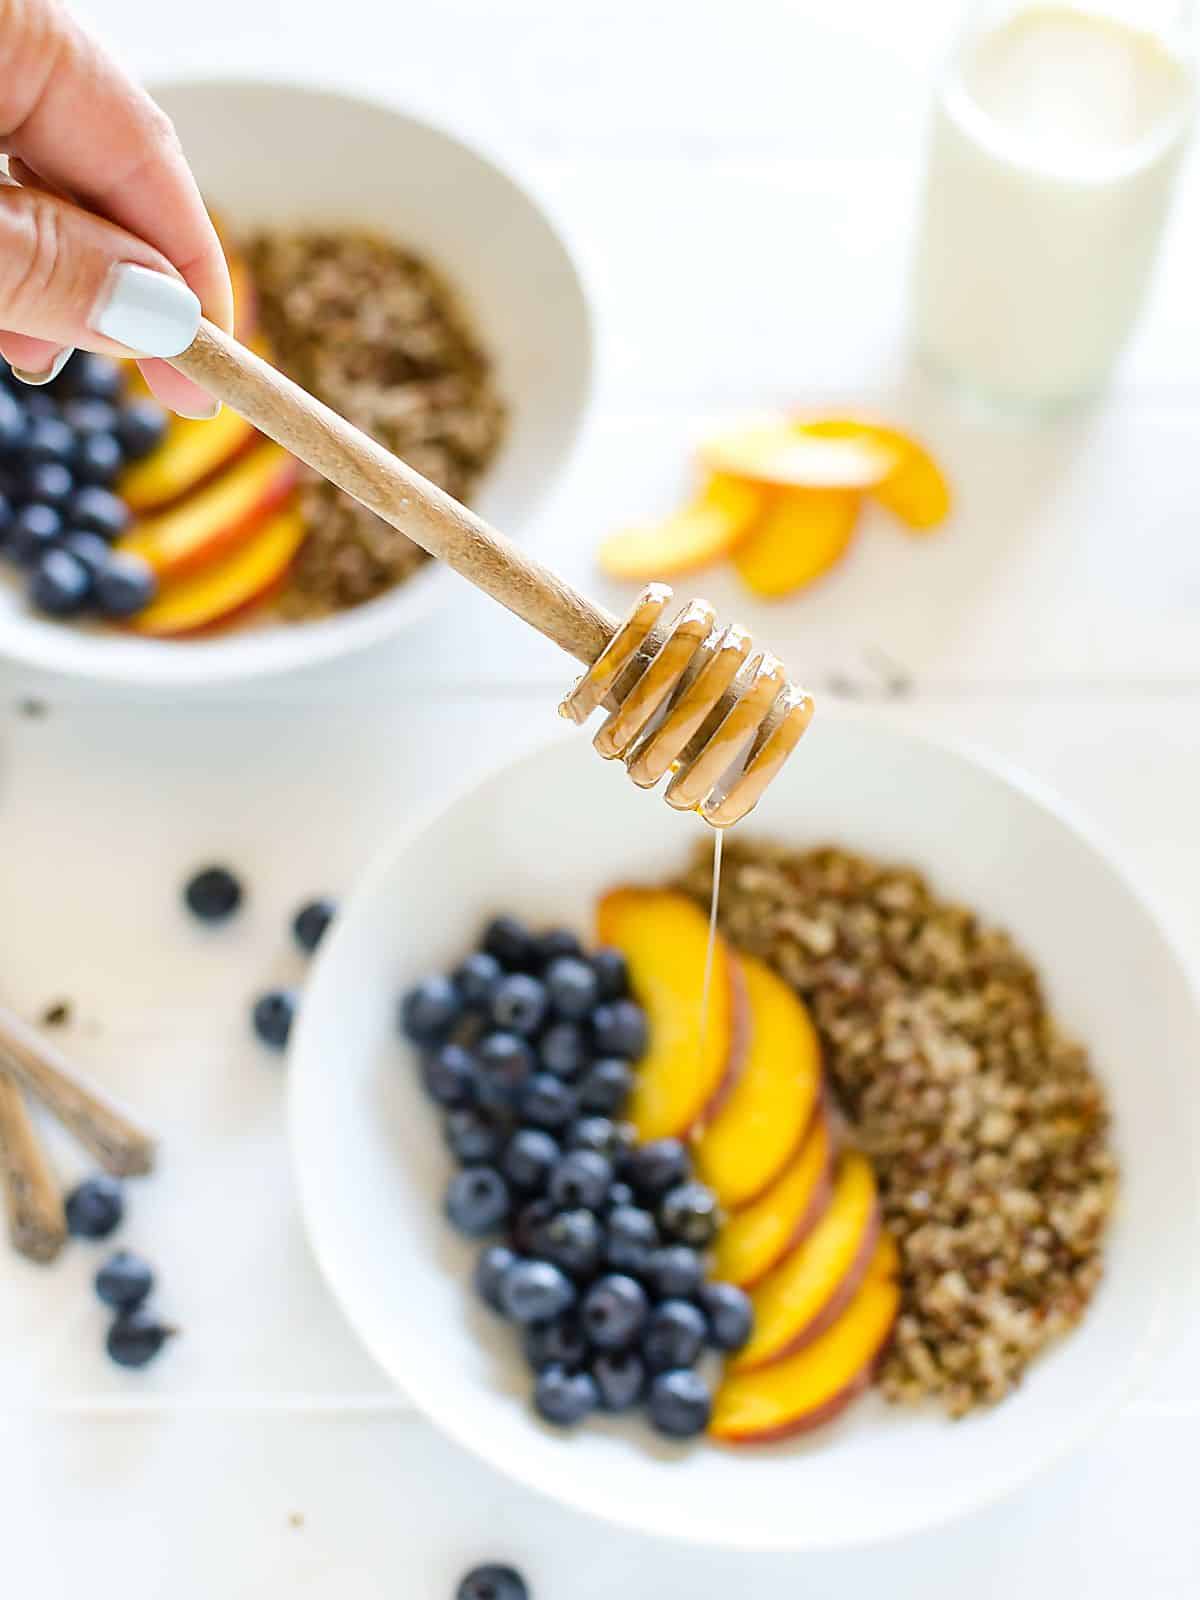 a hand holding a honey dipper over a bowl of blueberries, peaches, and quinoa, which is arranged in rows.